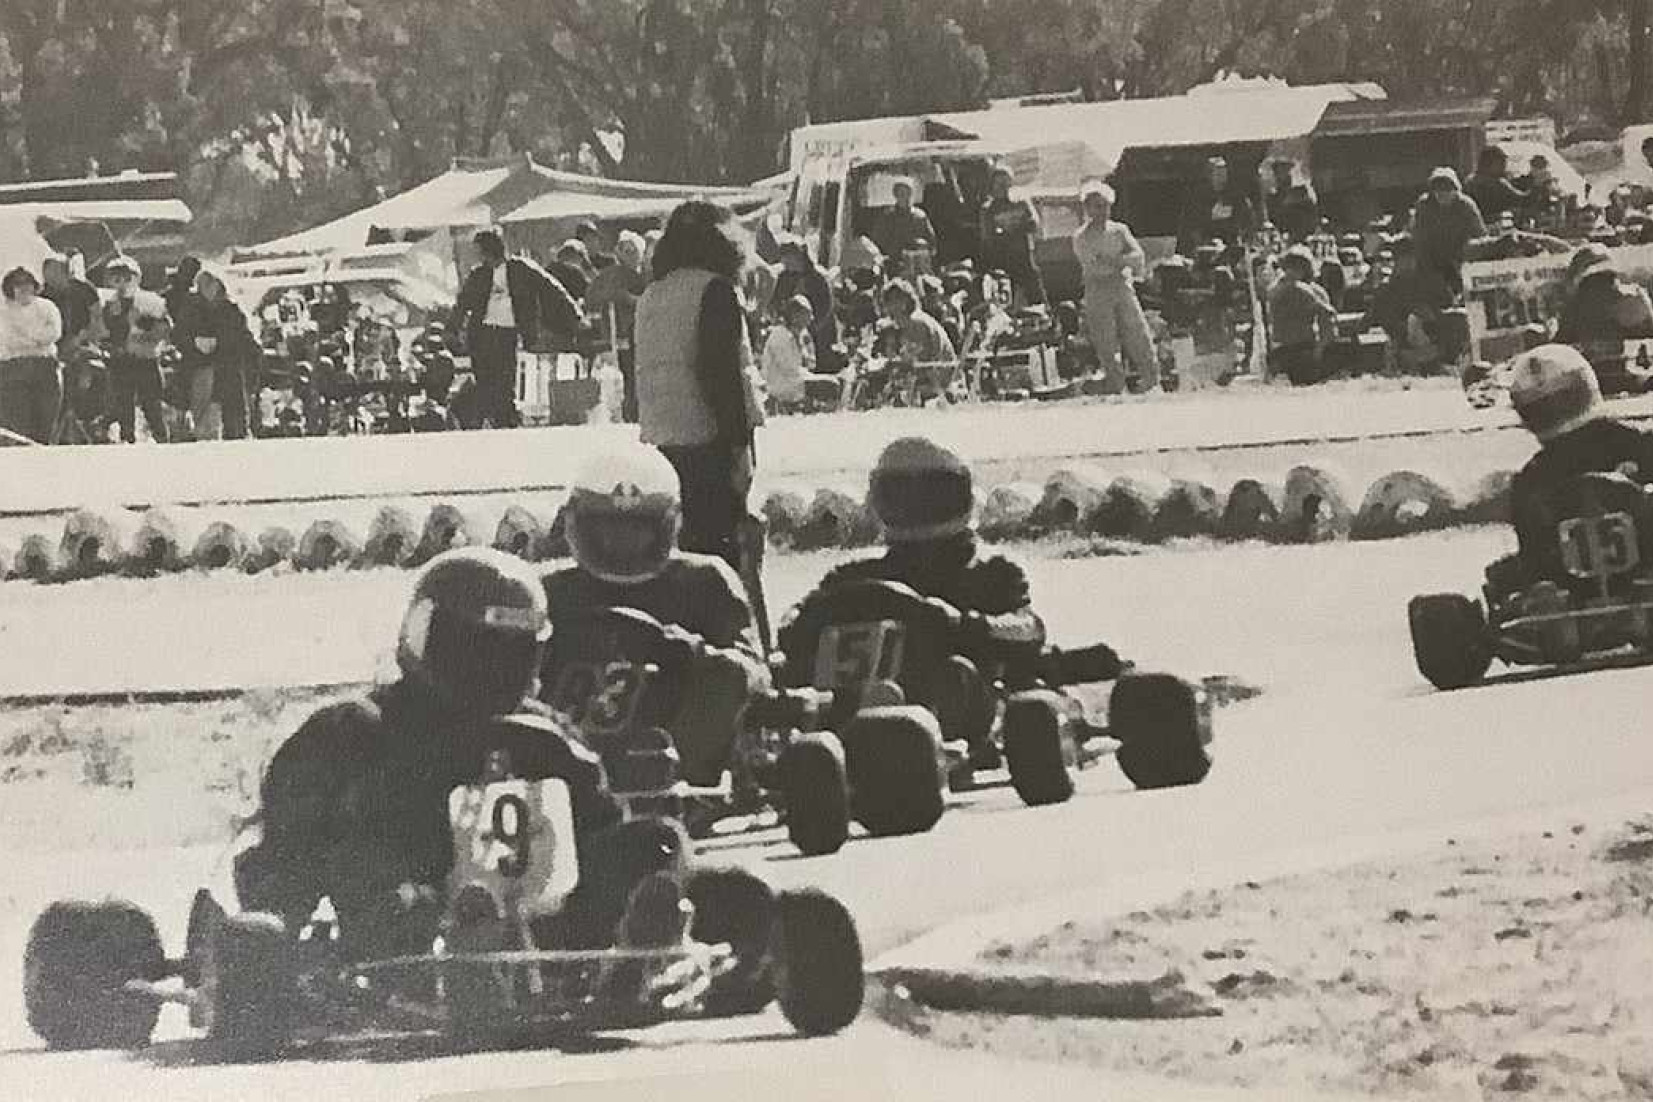 The track was popular in the 80's and a lot of fans came to watch these drivers battle it out.